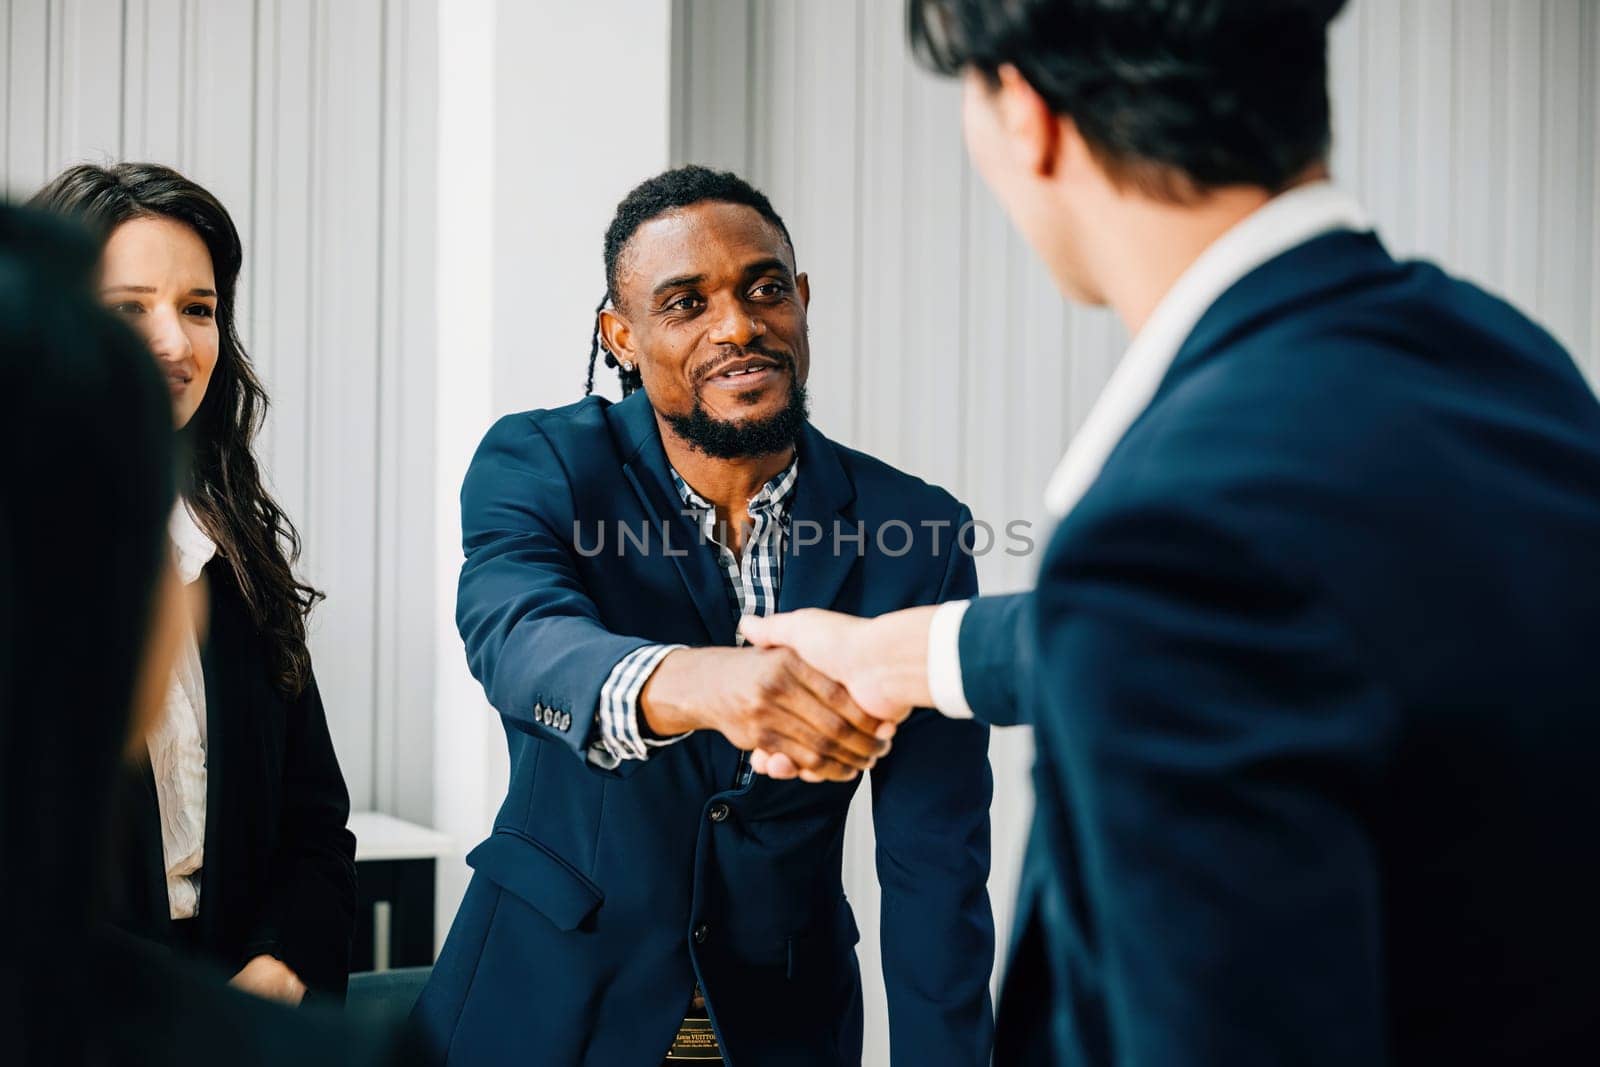 A mature businessman congratulates a younger colleague with a handshake, signifying a successful agreement and partnership during a leadership meeting. Businessmen shake hands as they negotiate.